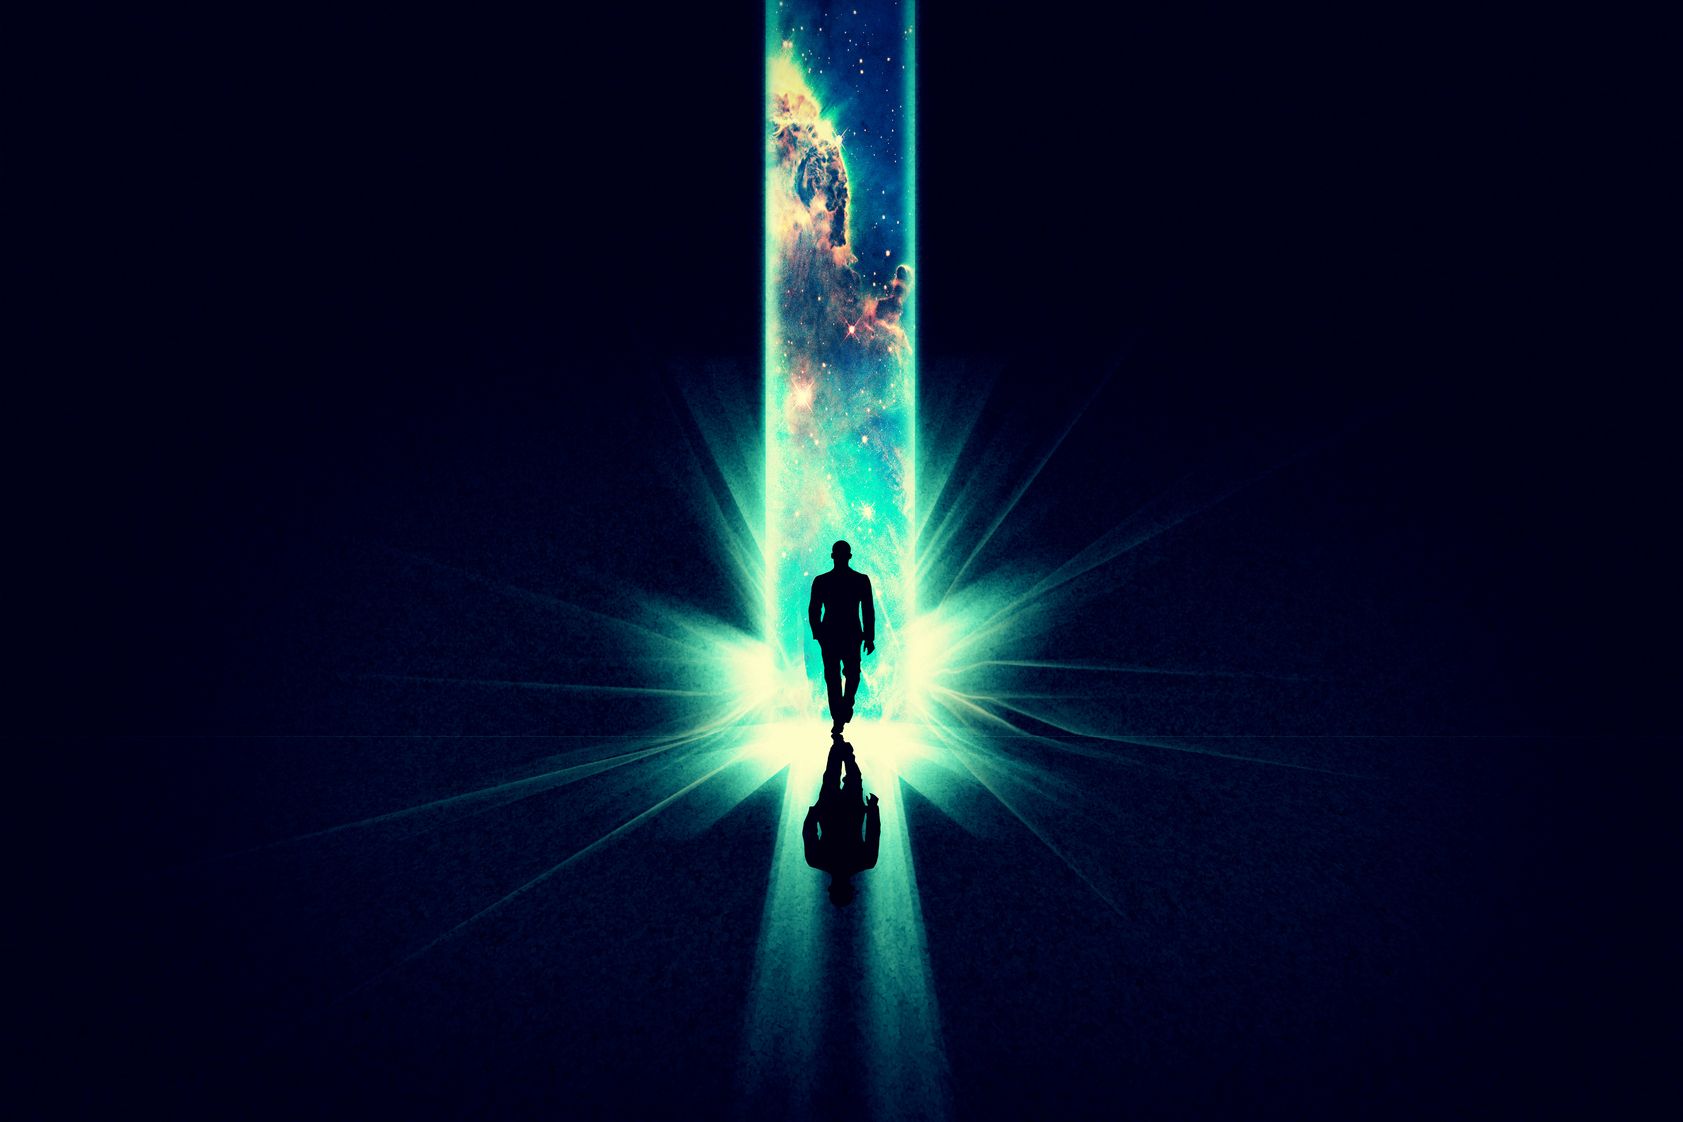 Illustration of a man walking into a beam of light overlaid with an image of the cosmos